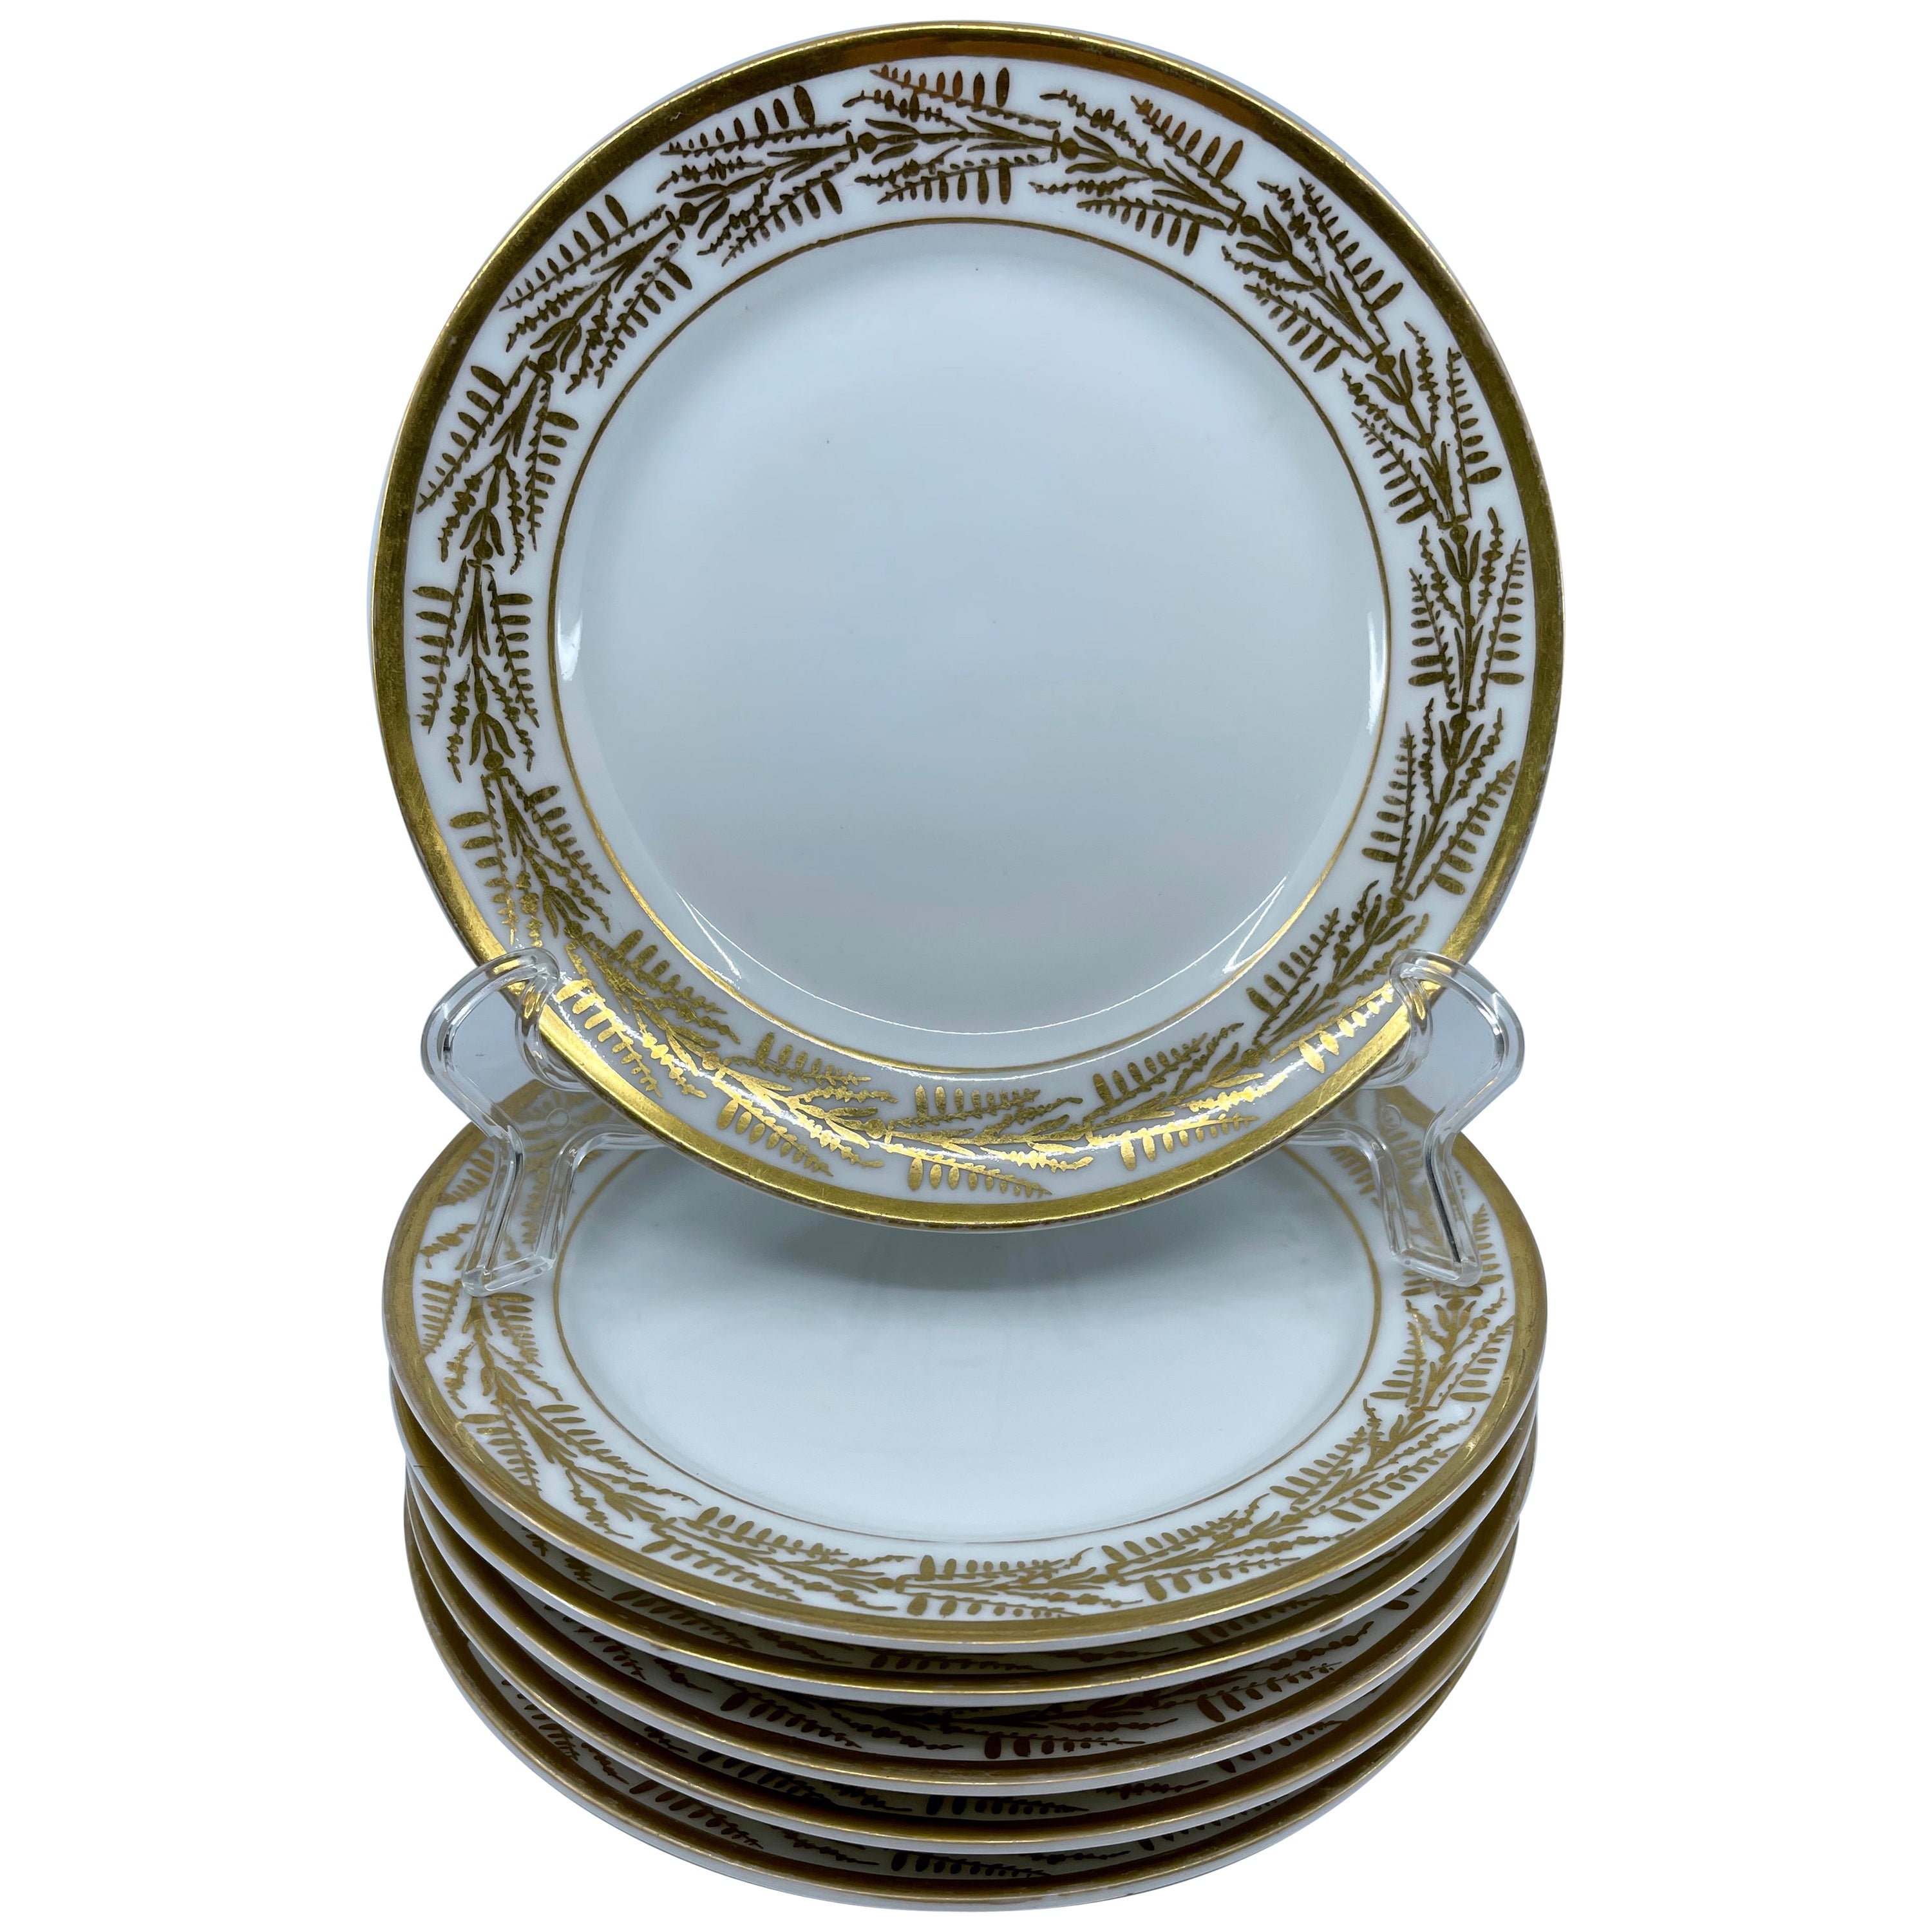 Set of Six White and Gold Empire Plates